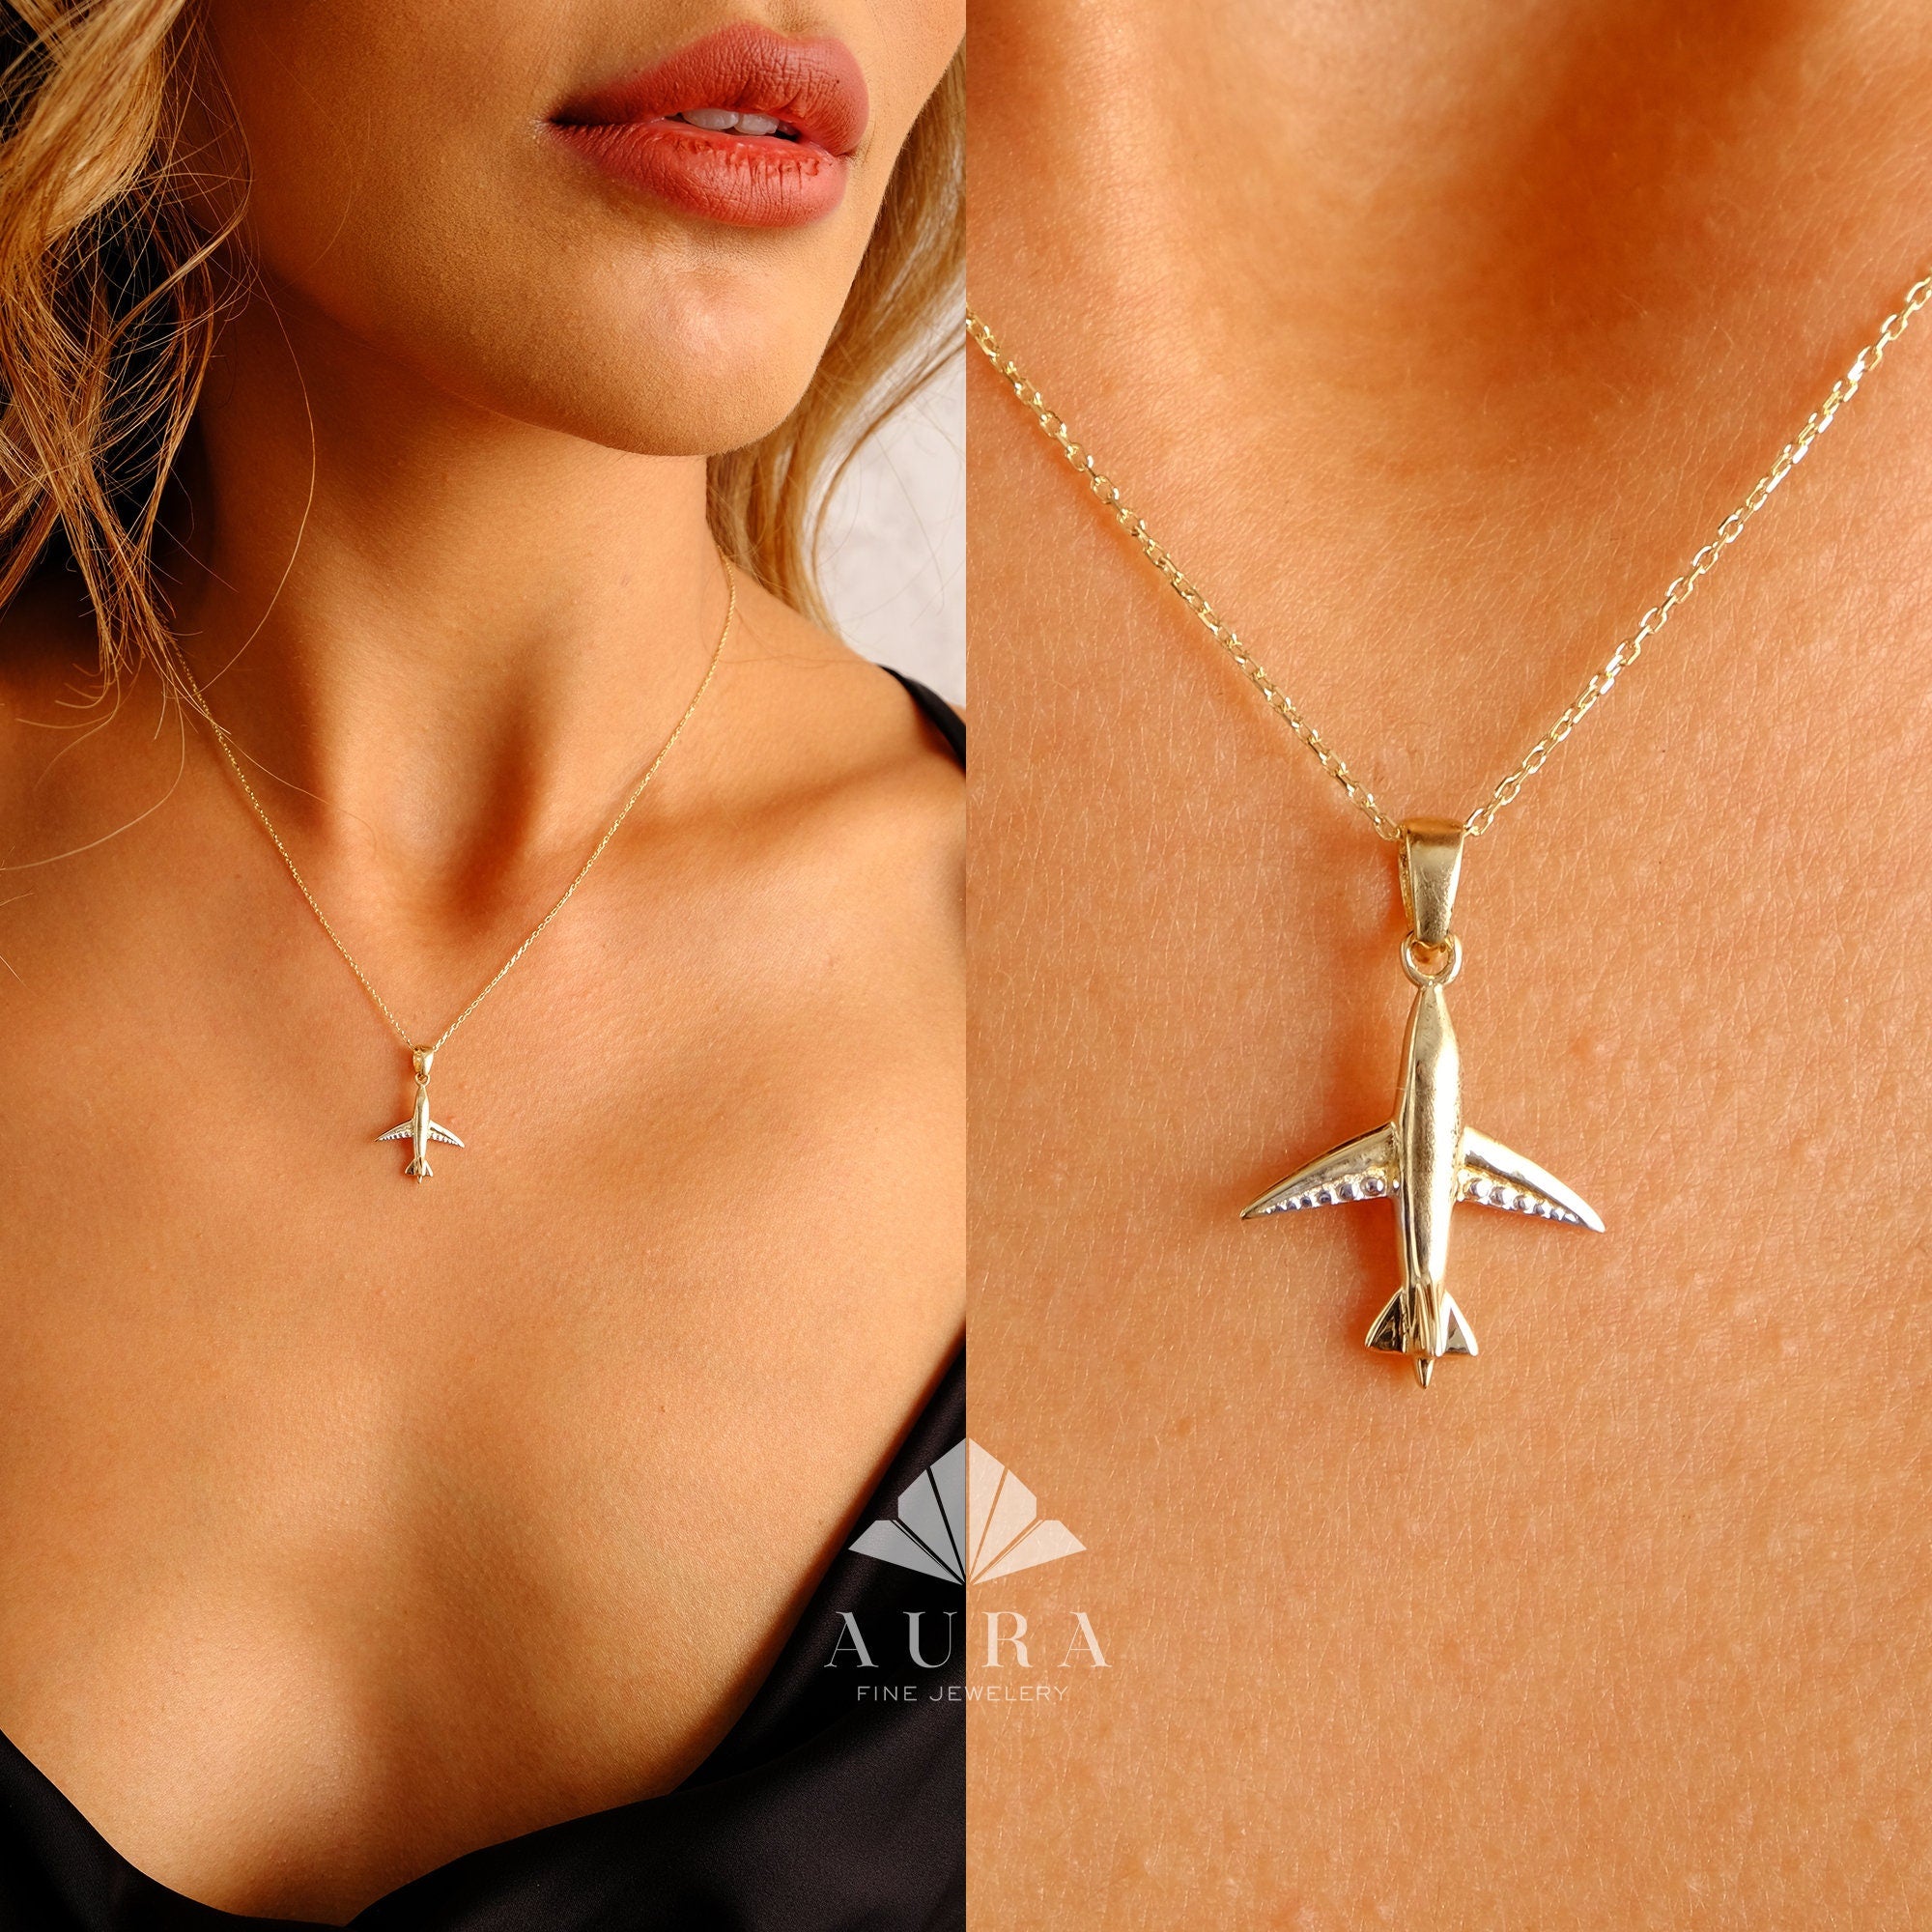 Janice She's Brave Necklace with Airplane Pendant, with Inspirational Quote  - Quan Jewelry